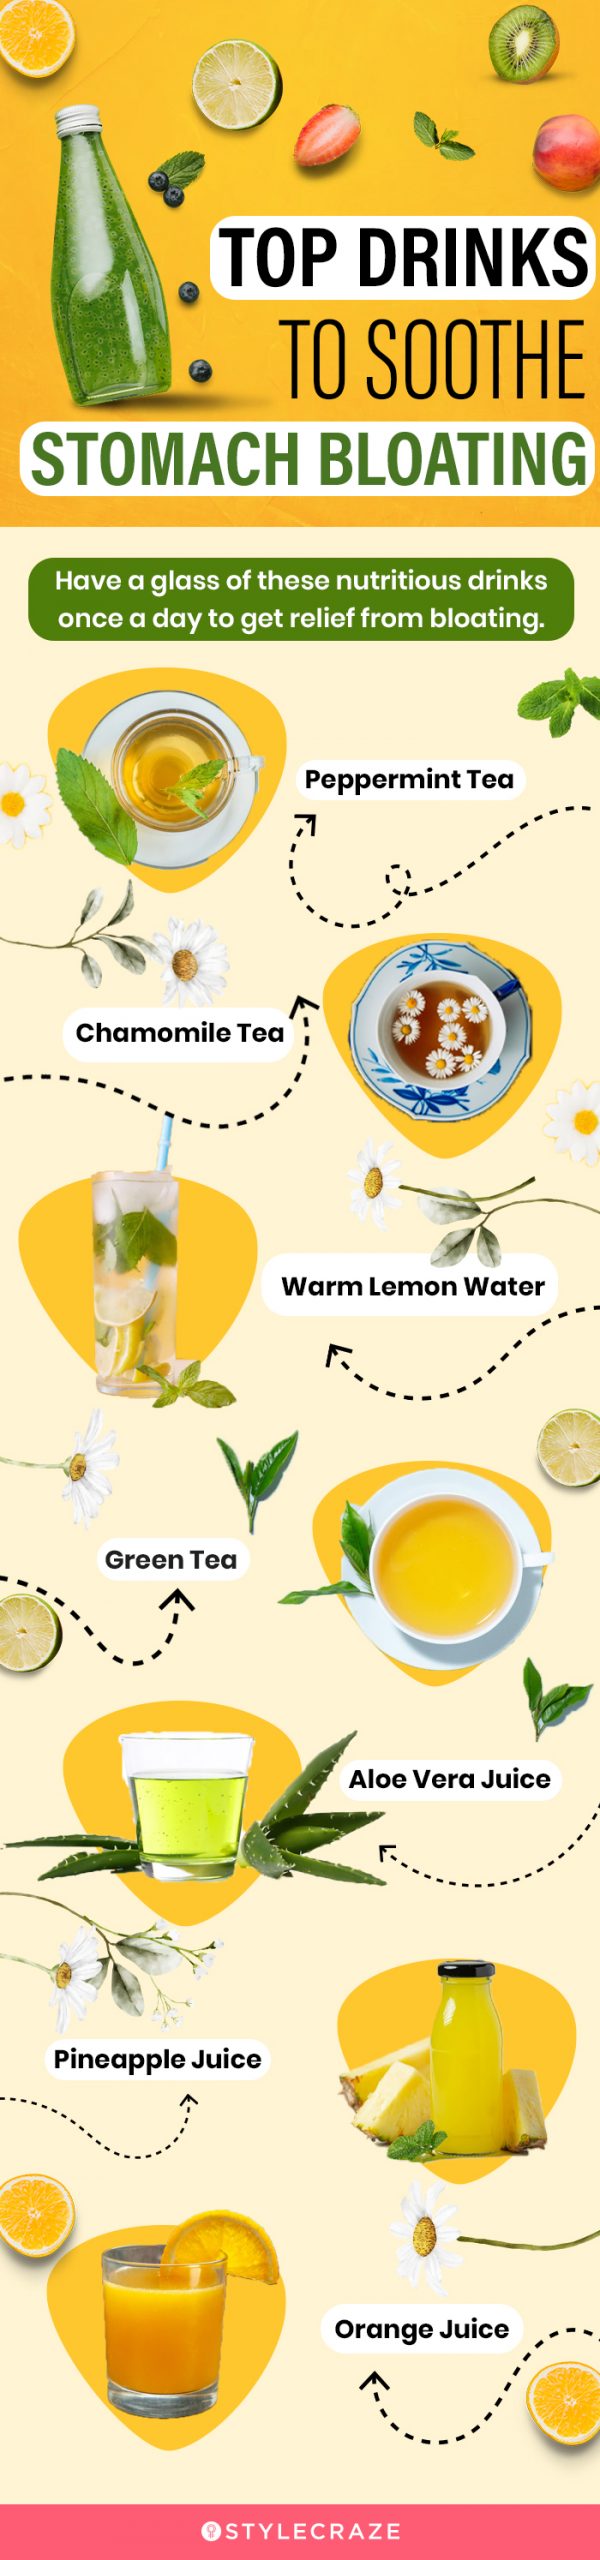 top drinks to soothe stomach bloating [infographic]